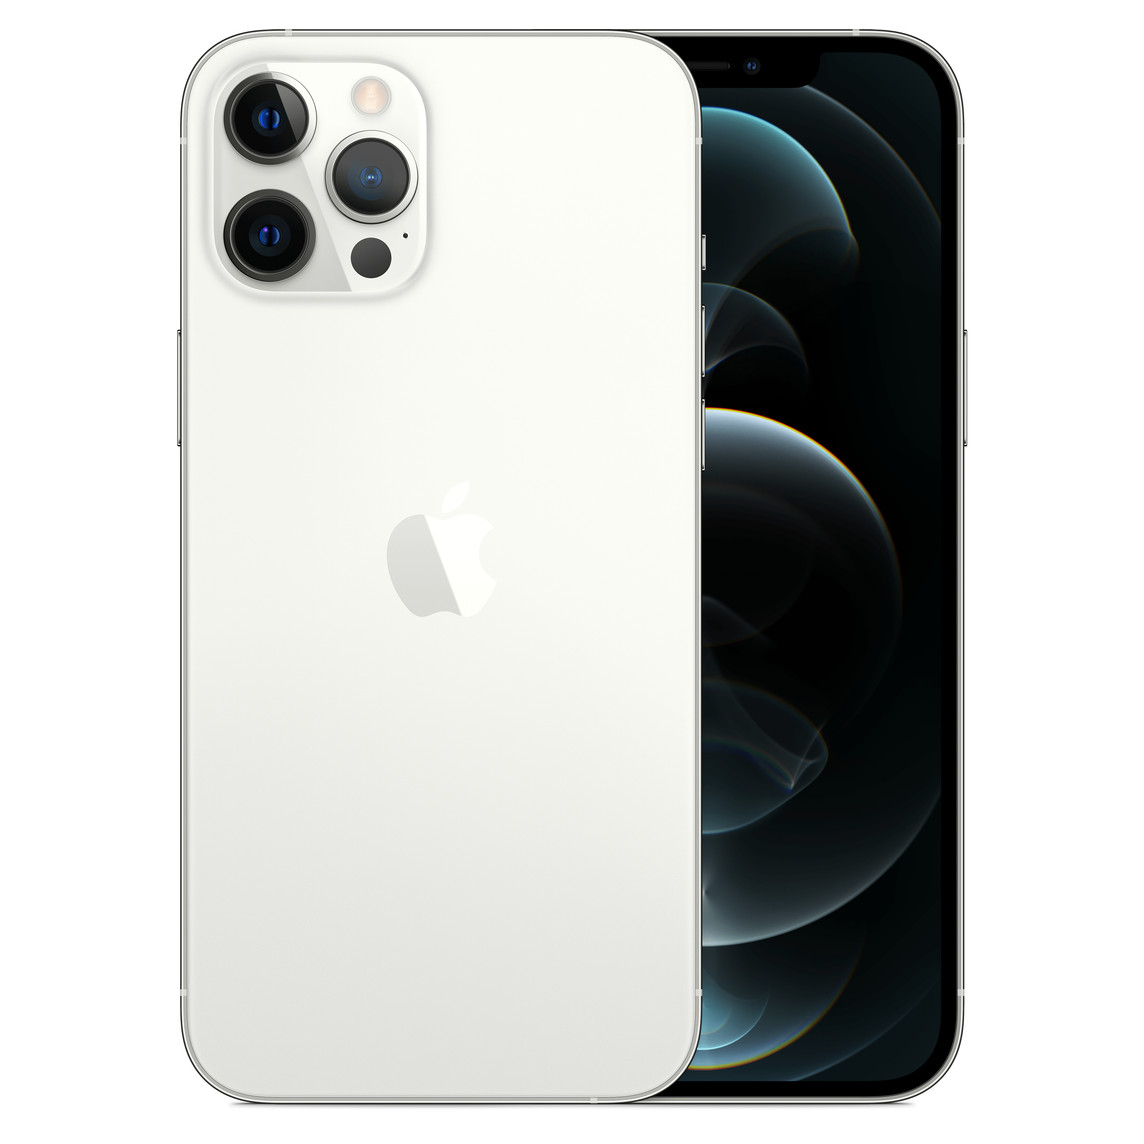 Silver iPhone 12 Pro Max, Pro camera system with True Tone flash, lidar, microphone, centred Apple logo. Front, all-screen display